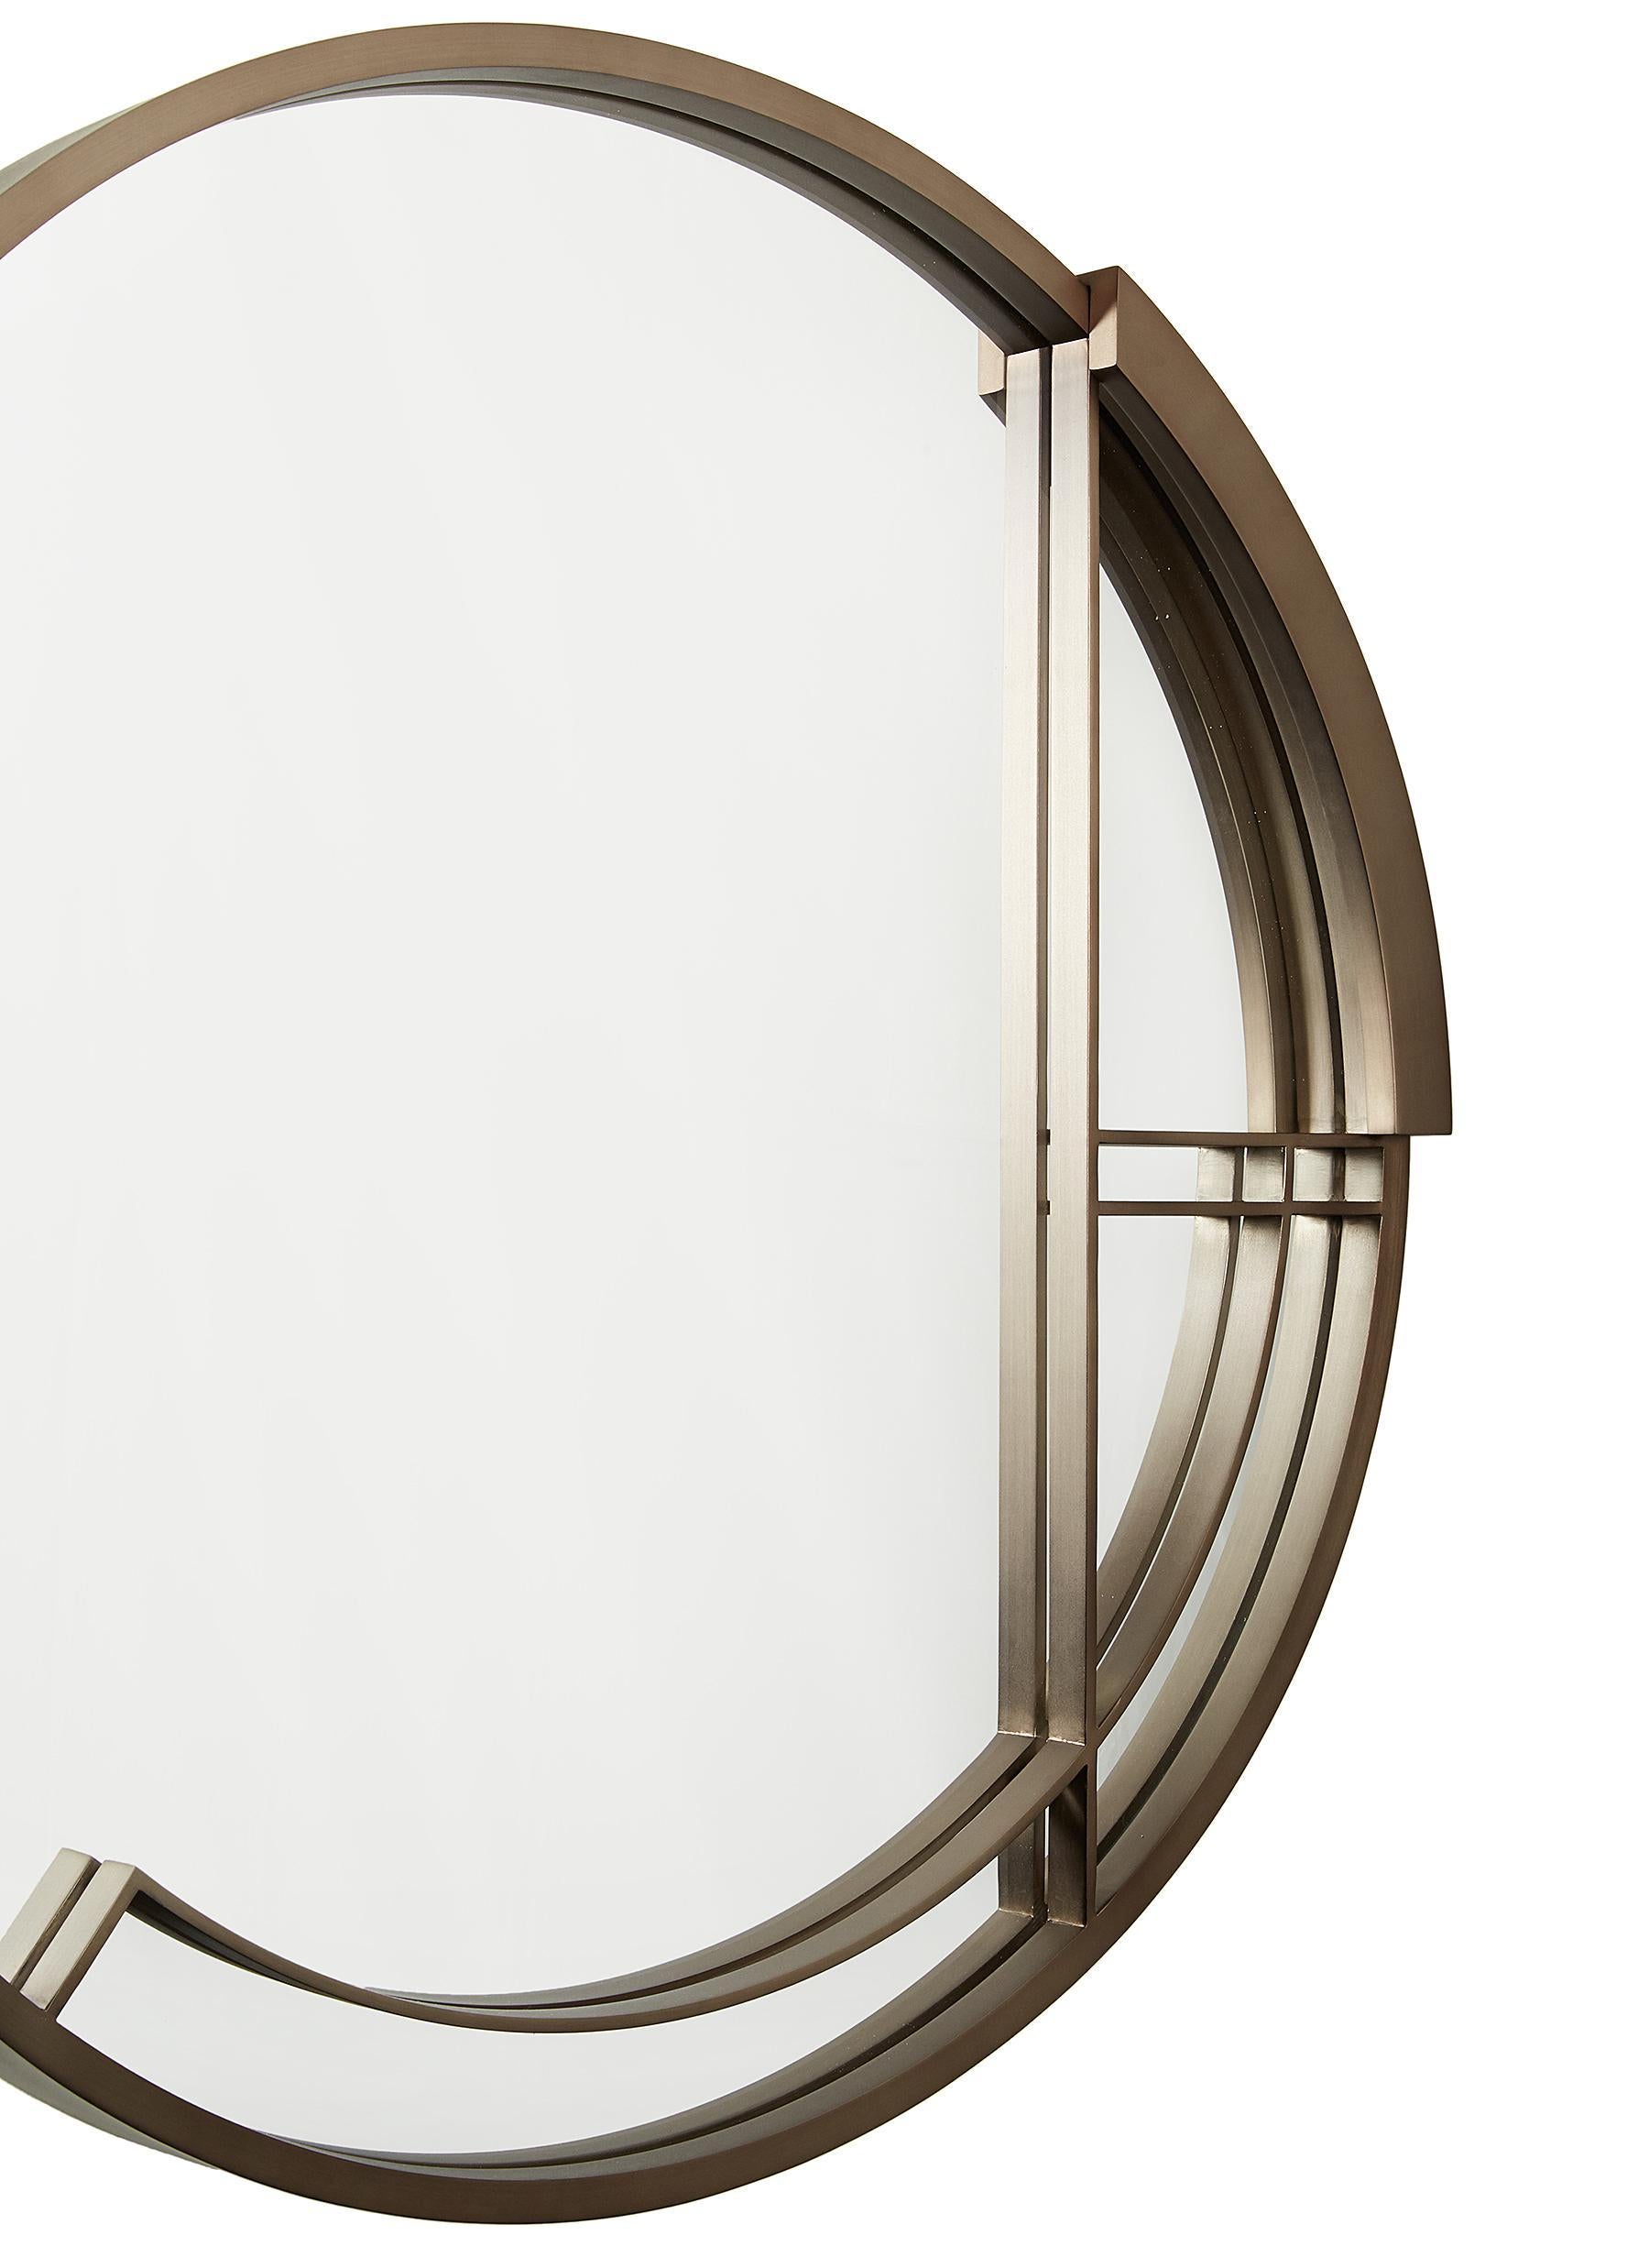 Brass round large mirror 71cm.
Bronze finishing.

Description: Large Mirror in Brass and Mirror
Color: Bronze
Size: 71Ø x 4 cm
Material: Bronze and Mirror
Collection: Mid Century Rhythm